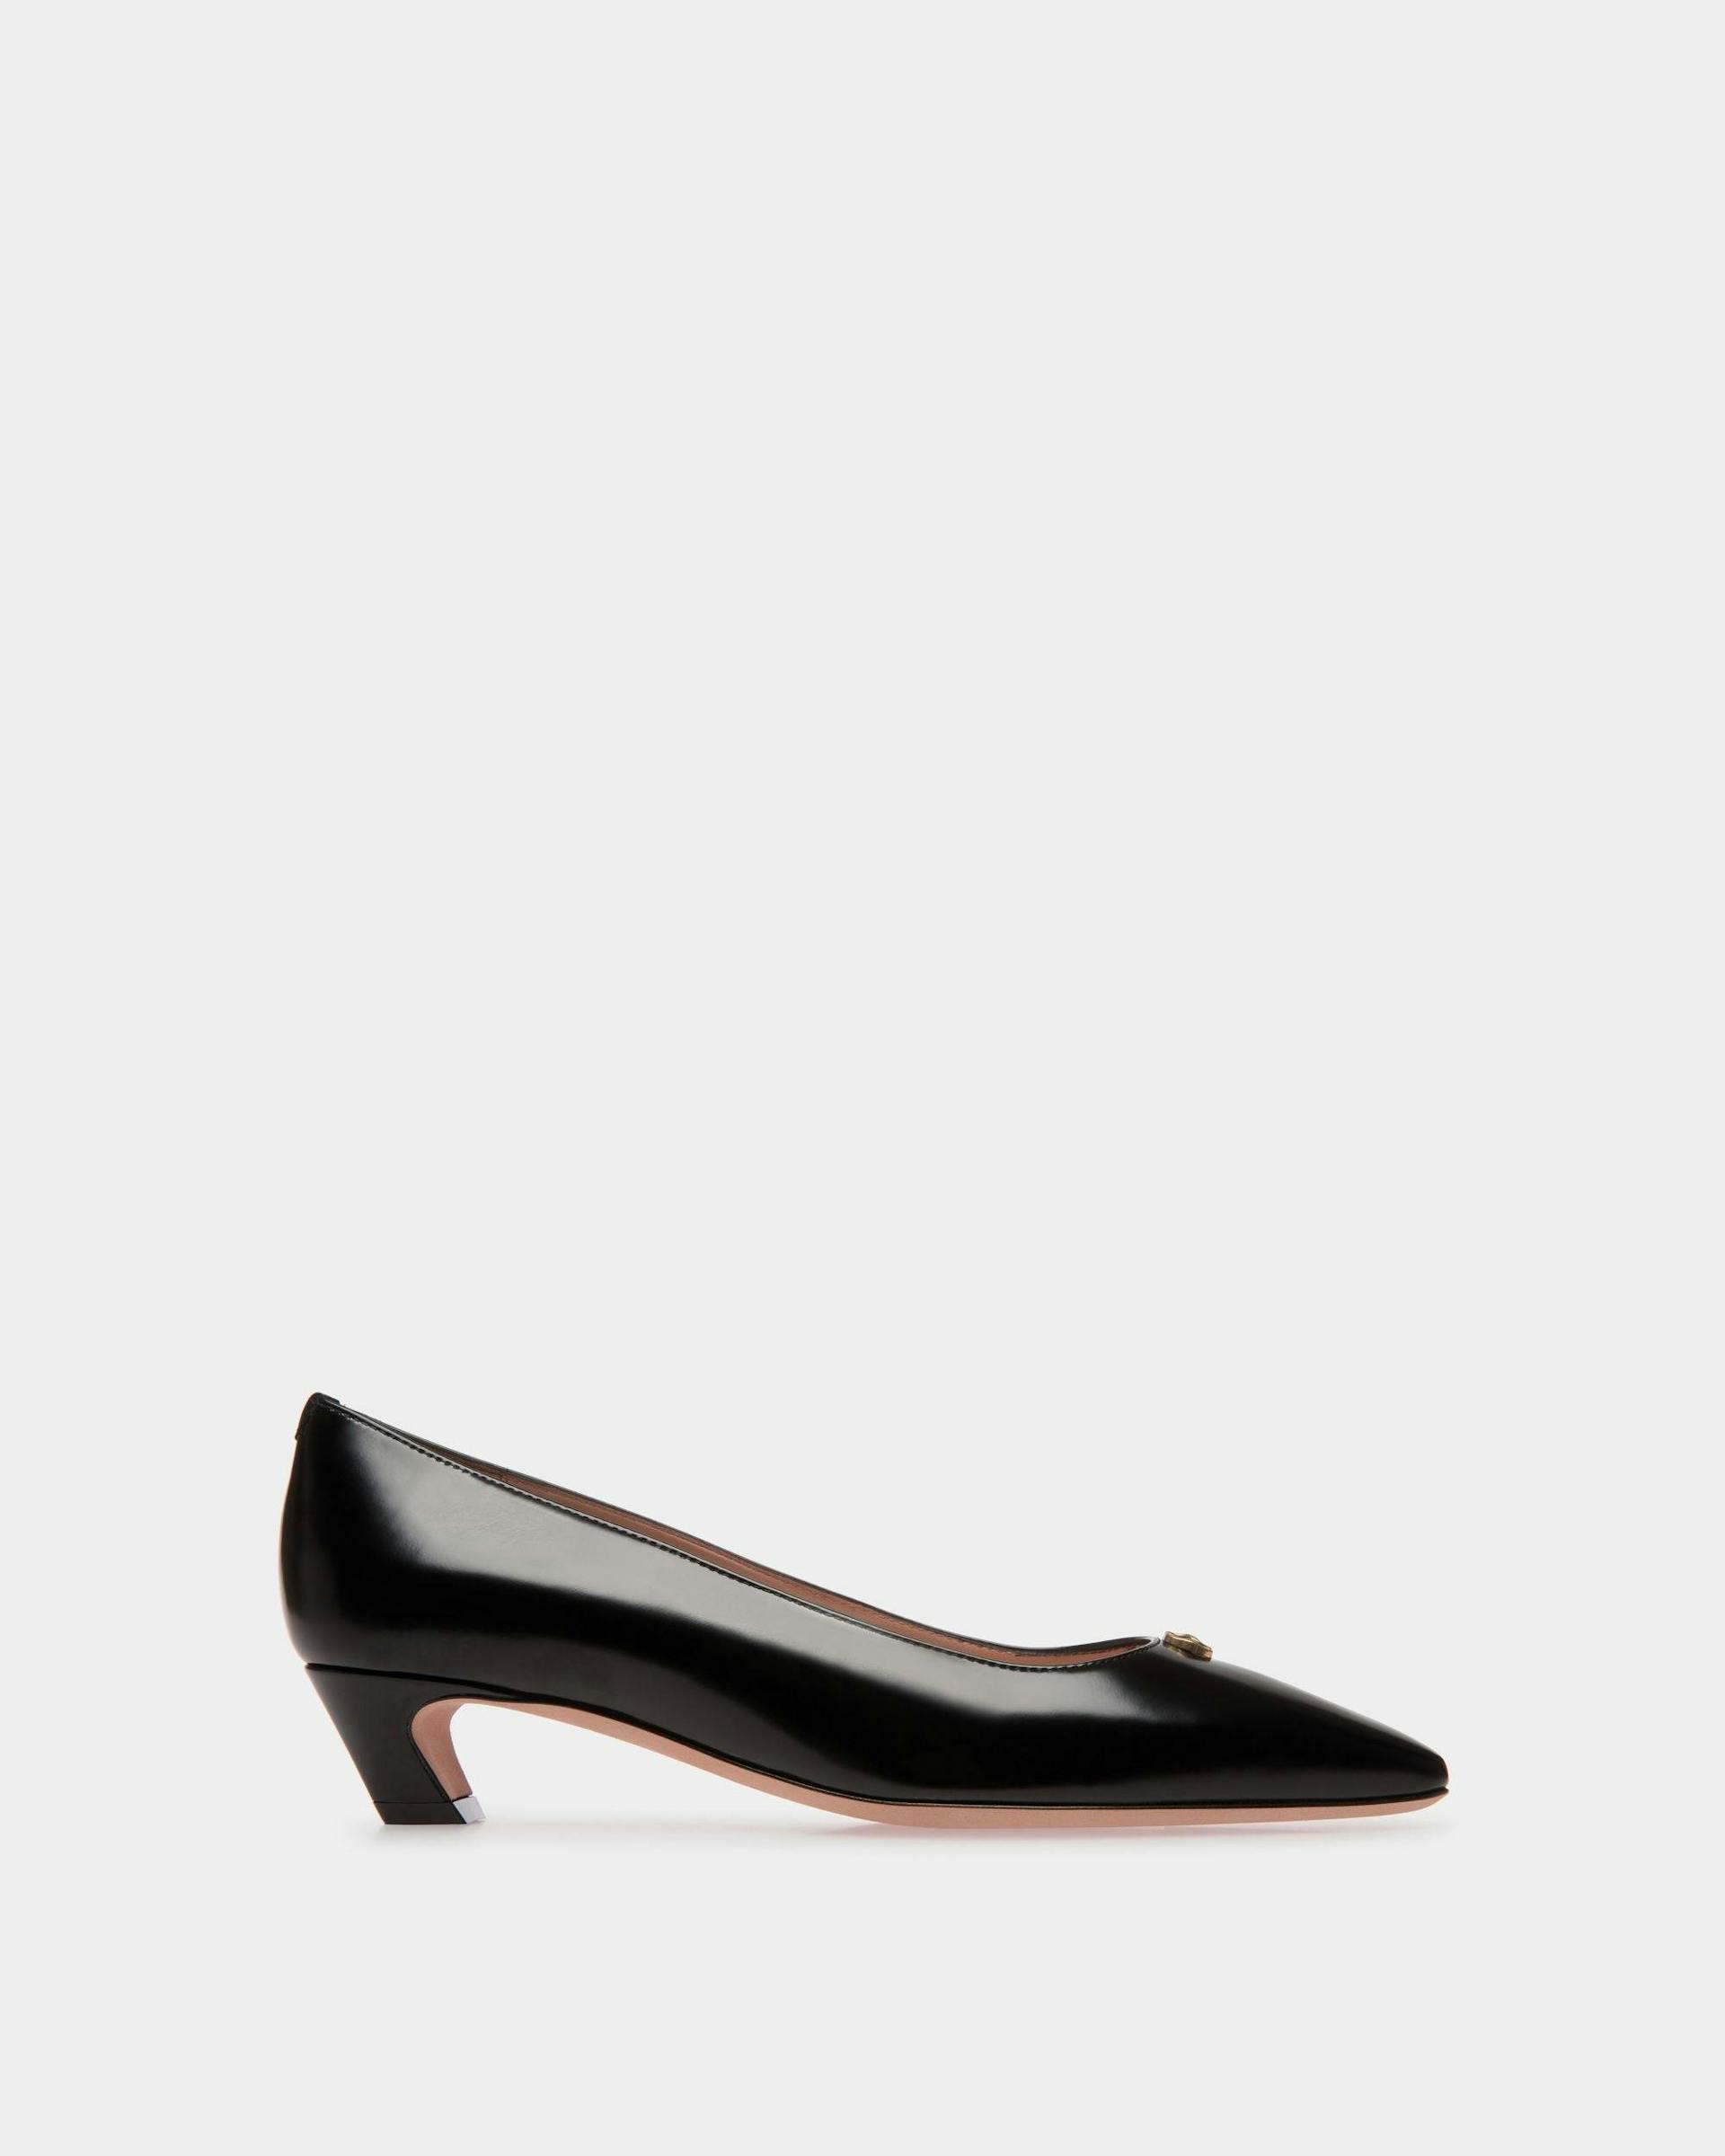 Women's Sylt Pump In Black Leather | Bally | Still Life Side